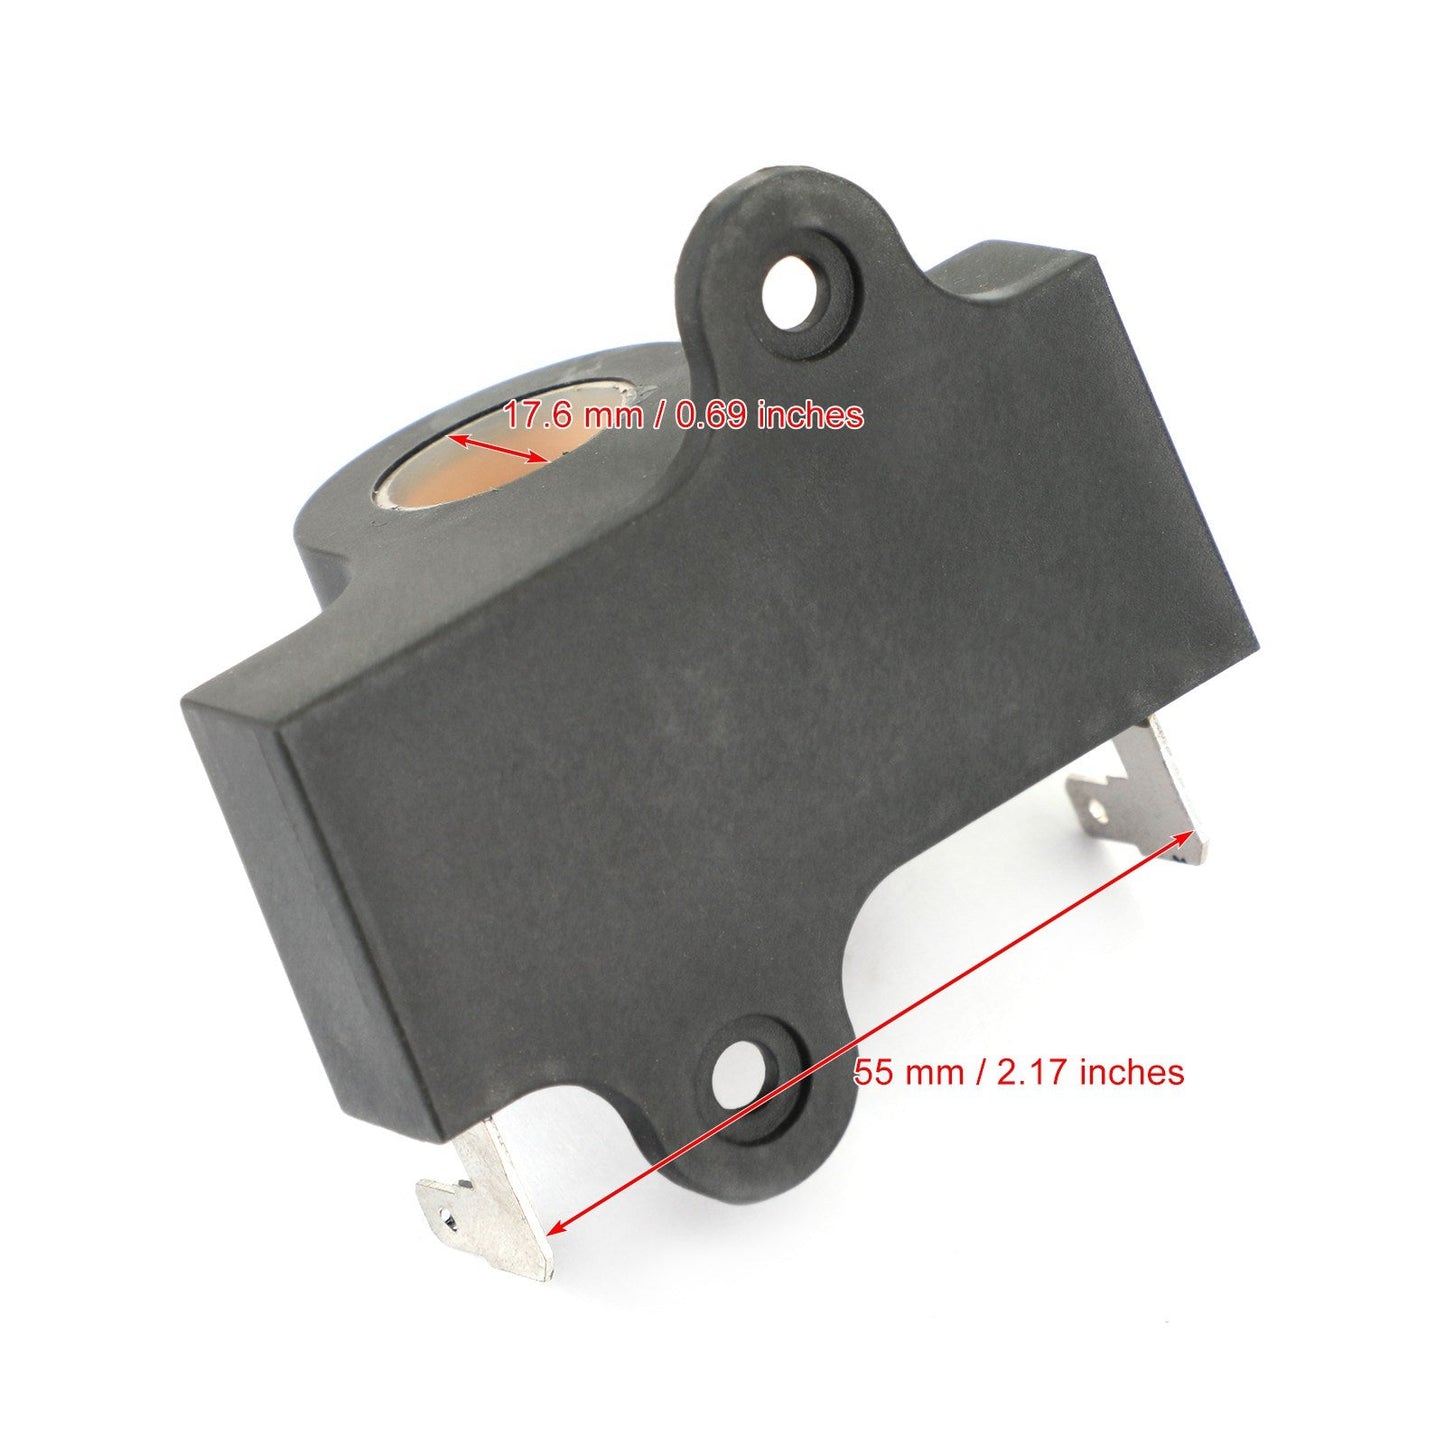 Inductive Throttle Sensor For all EZGO TXT, DCS, Medalist and PDS electric golf cart models 1994.5 & UP